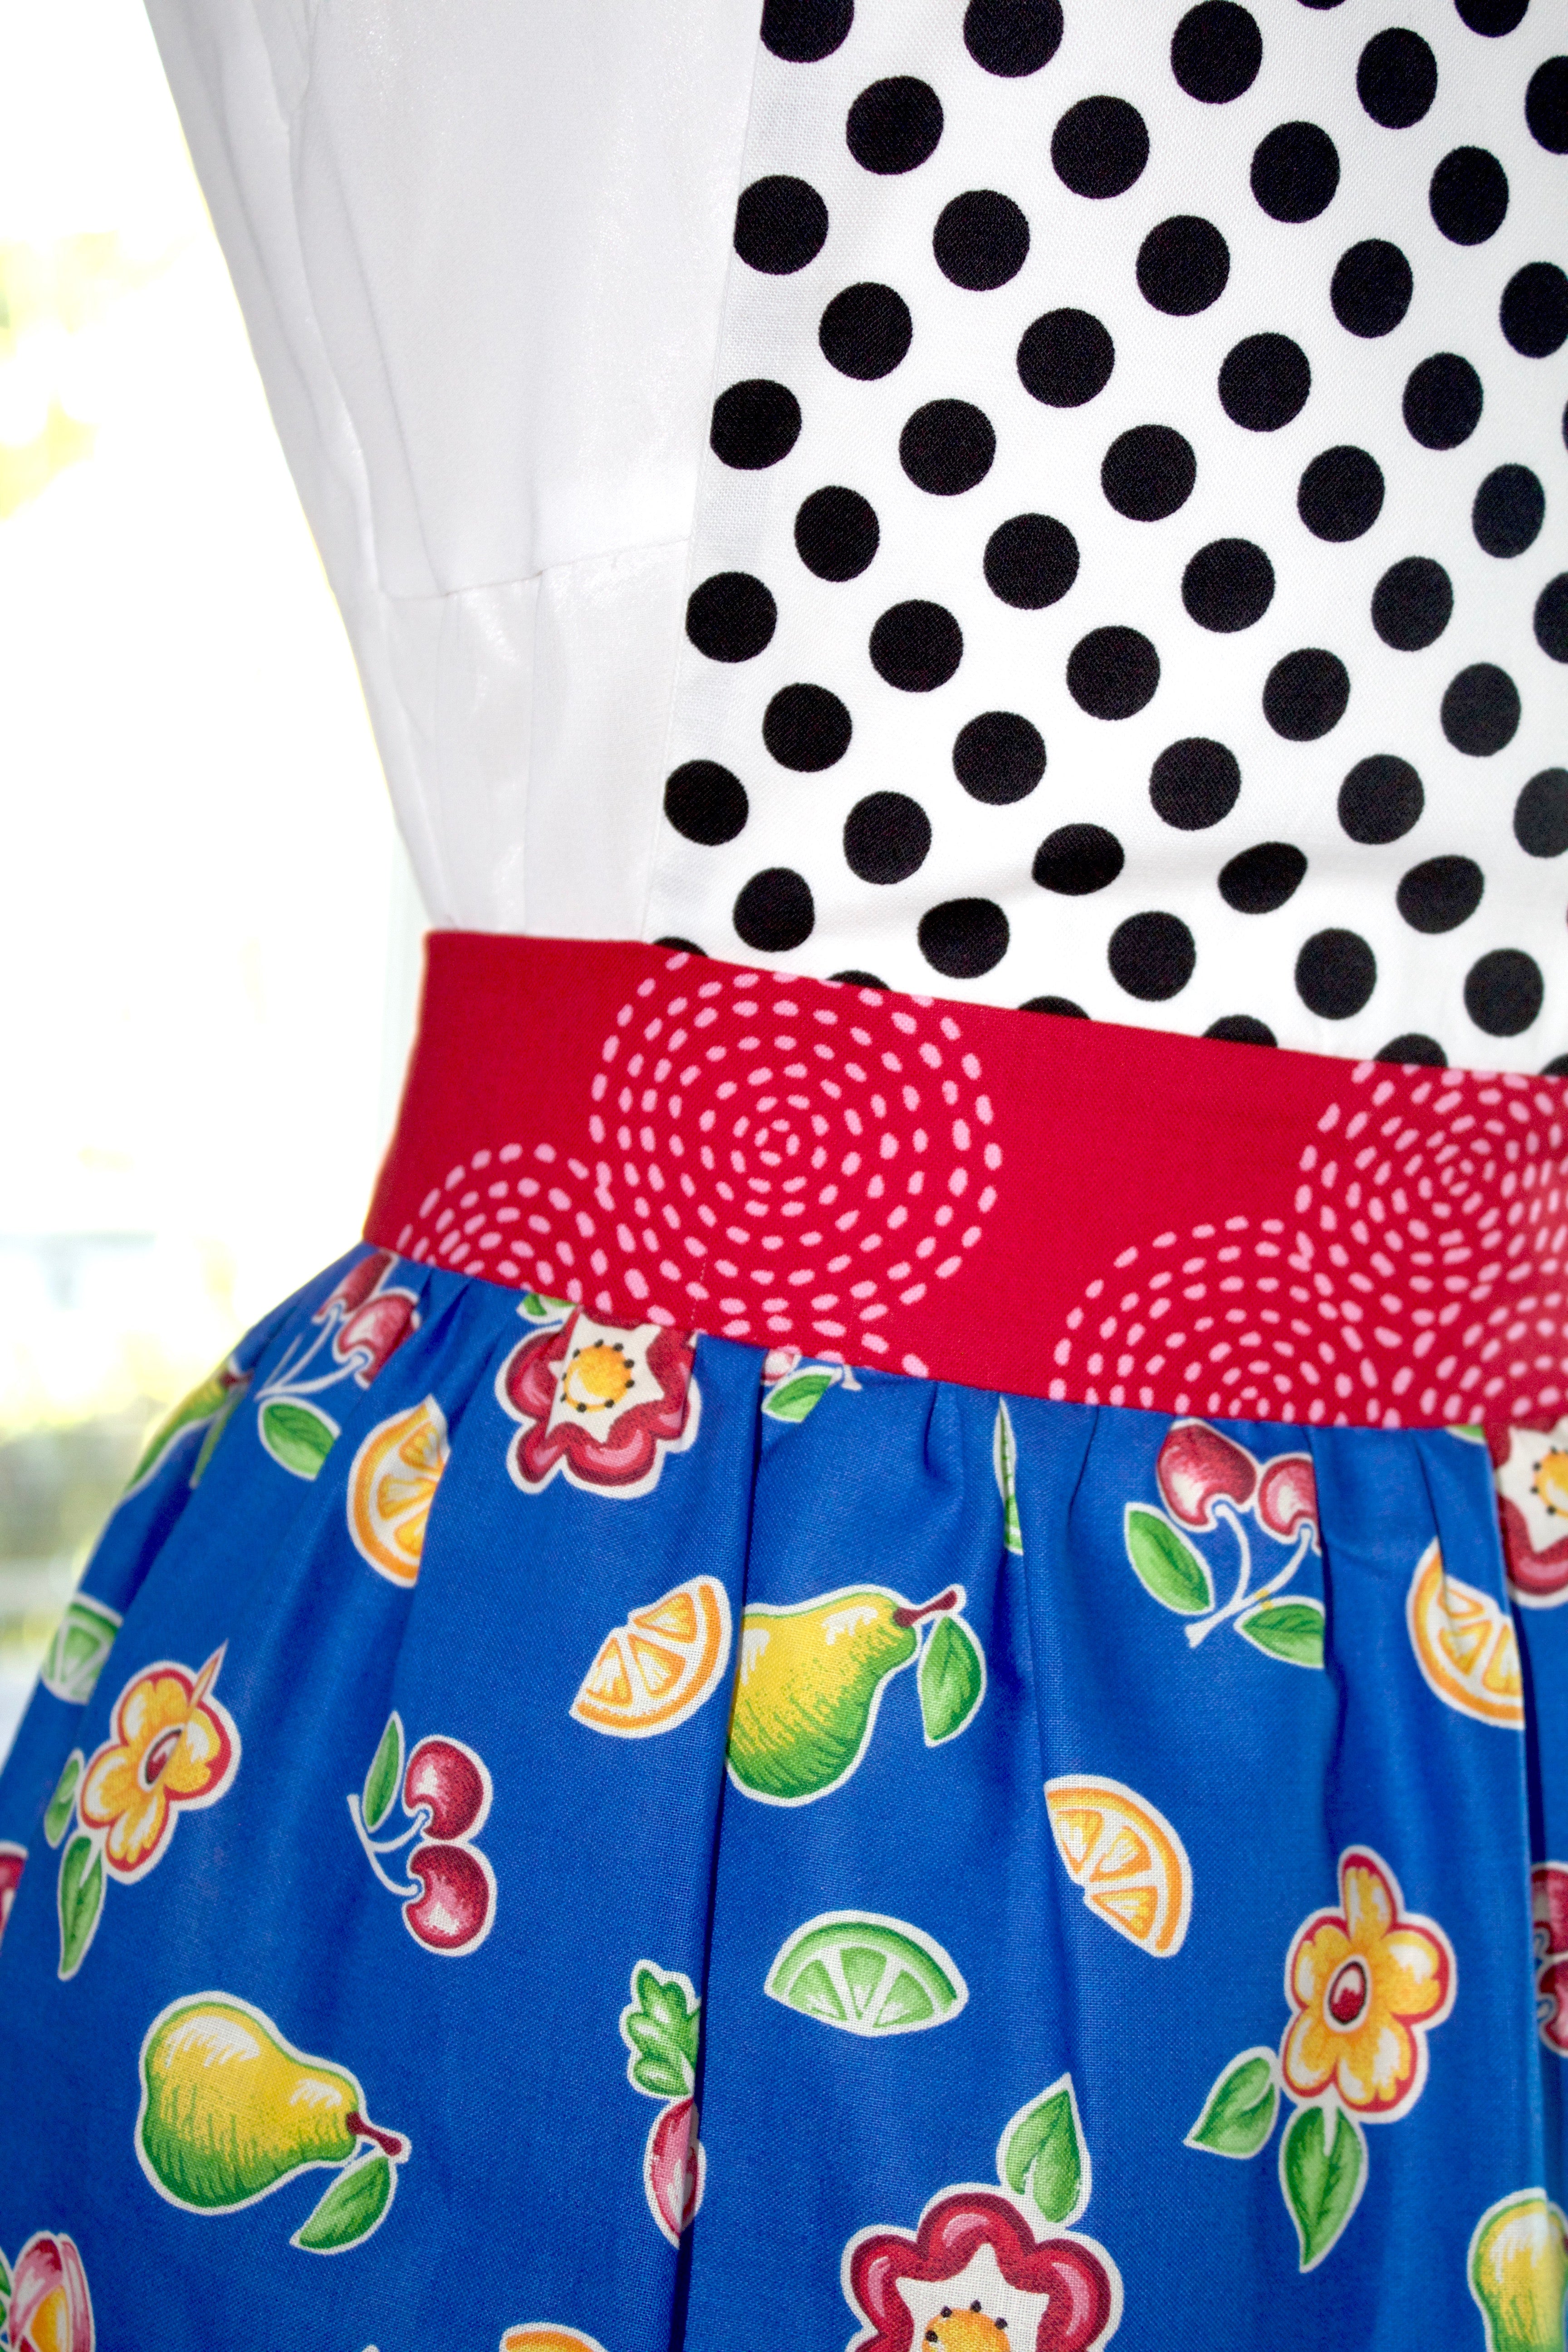 Recipe for Happiness Vienna Style Apron